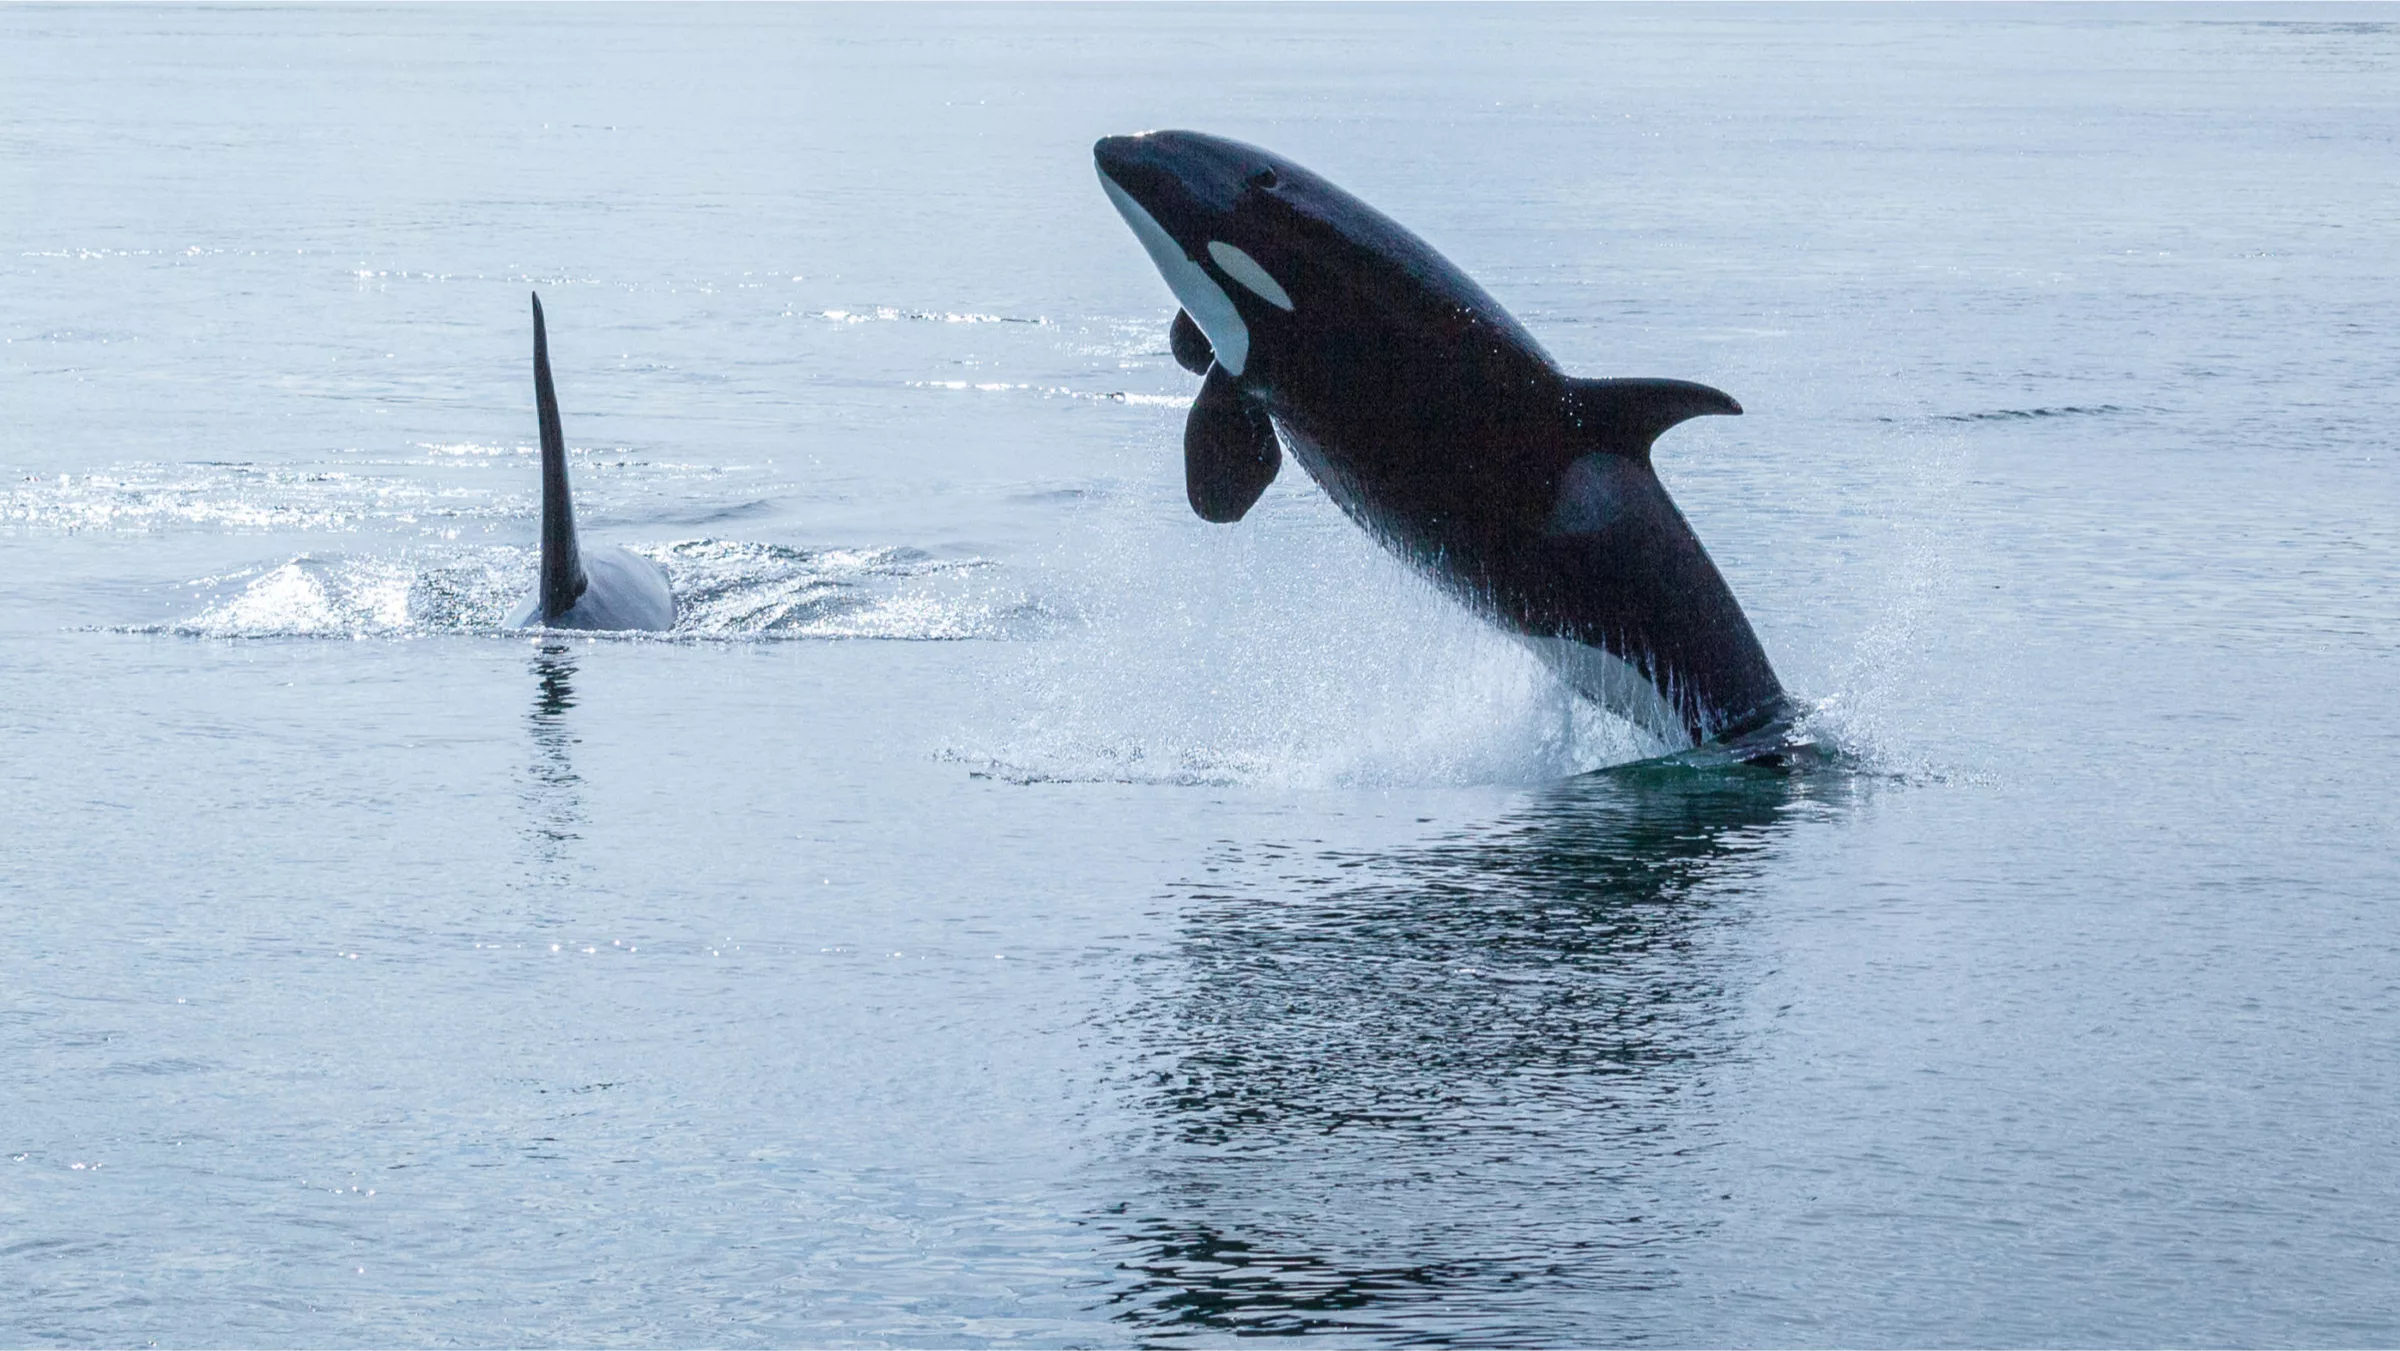 Southern Resident orca jumping out of water